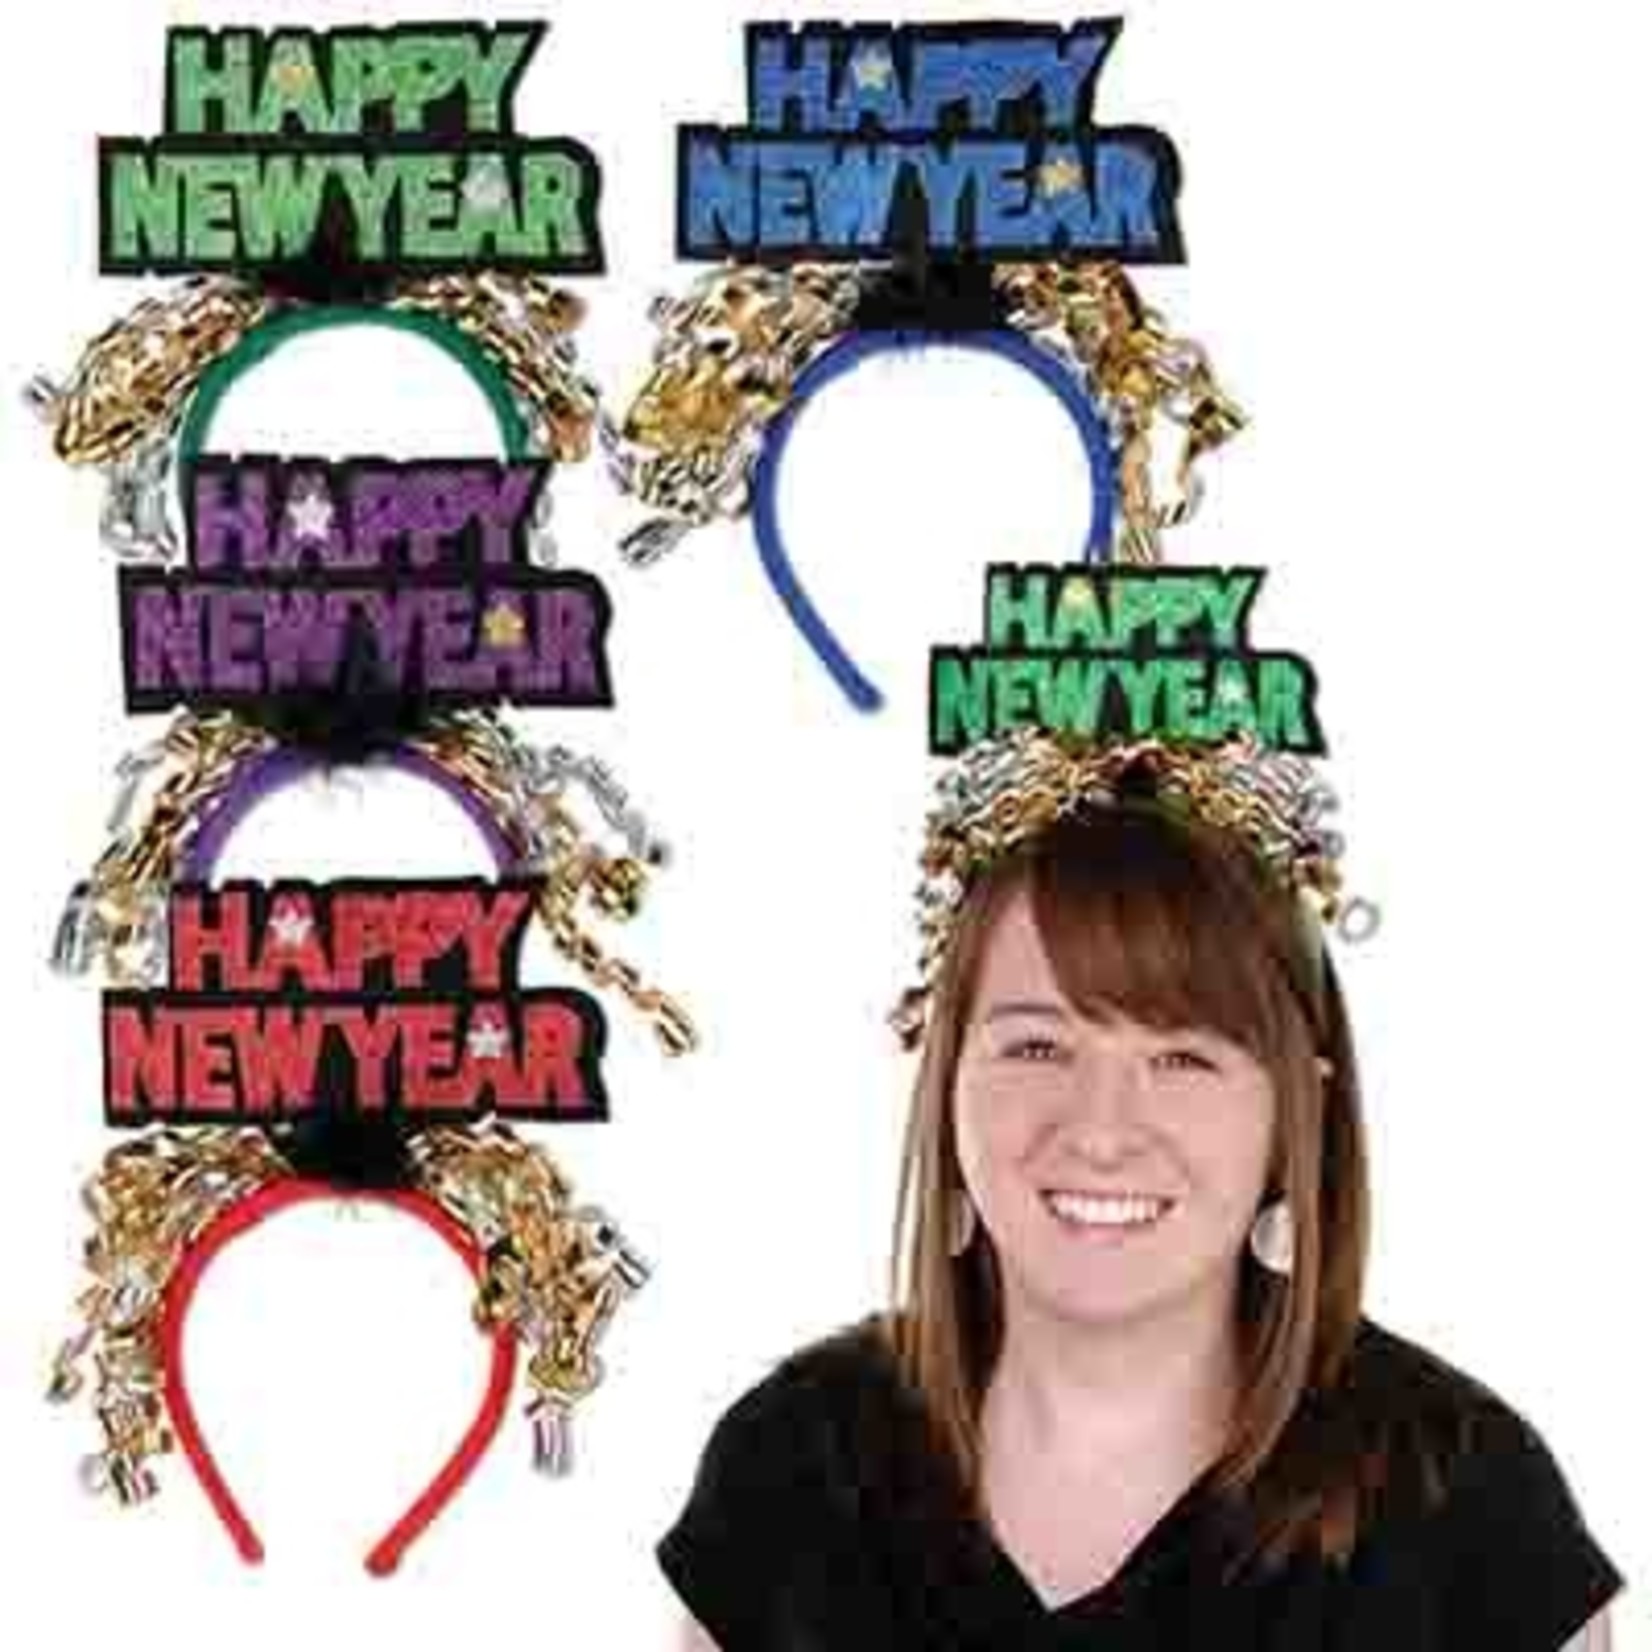 Beistle Glittered Happy New Year Headbands - 1ct. Asst. Colors